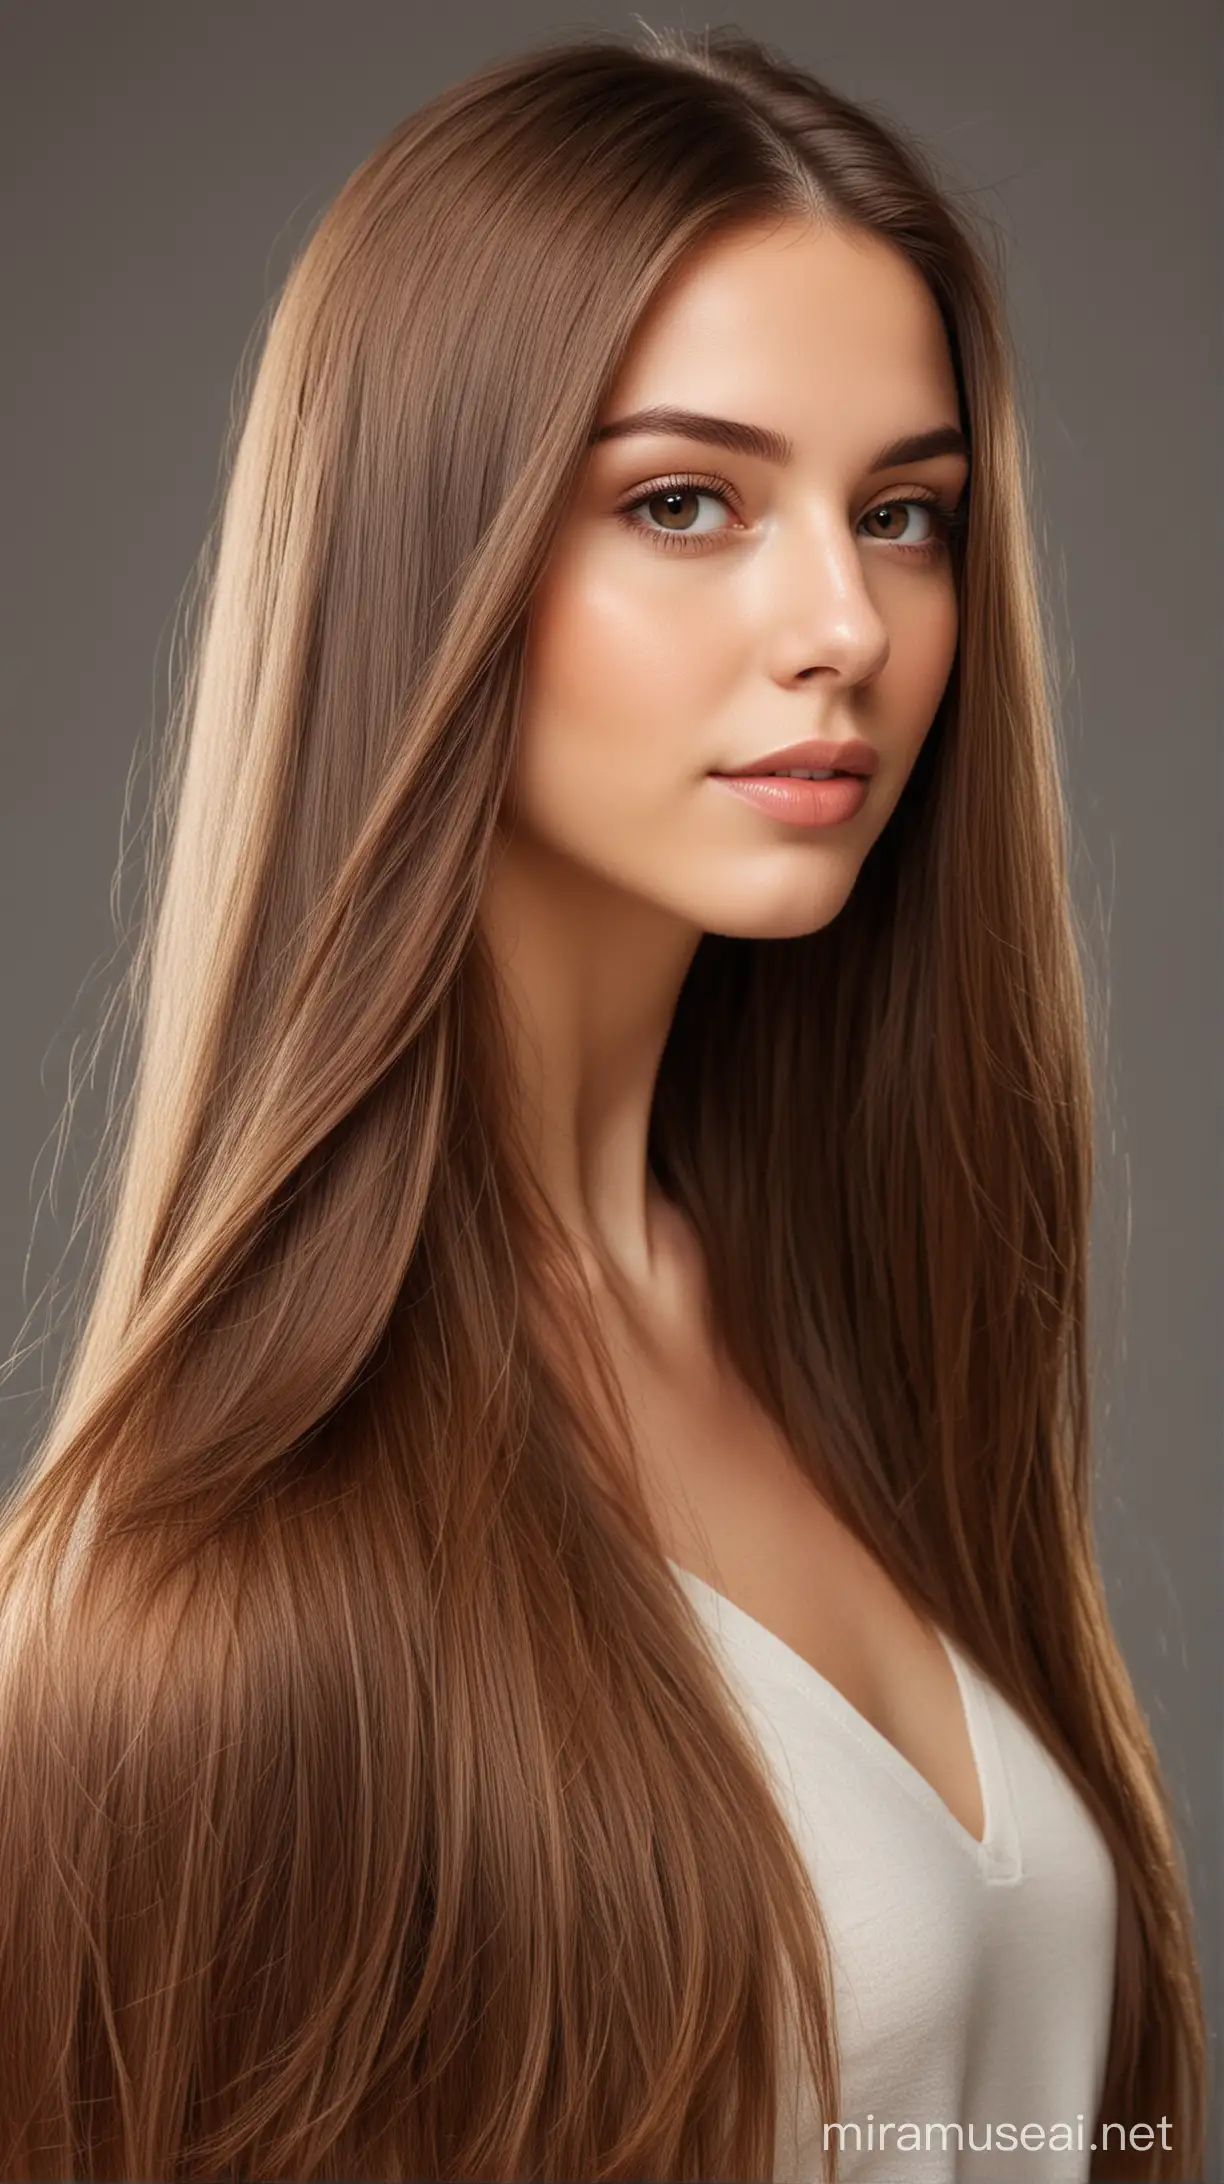 A woman with long, brown, very straight and soft hair
full picture, full body